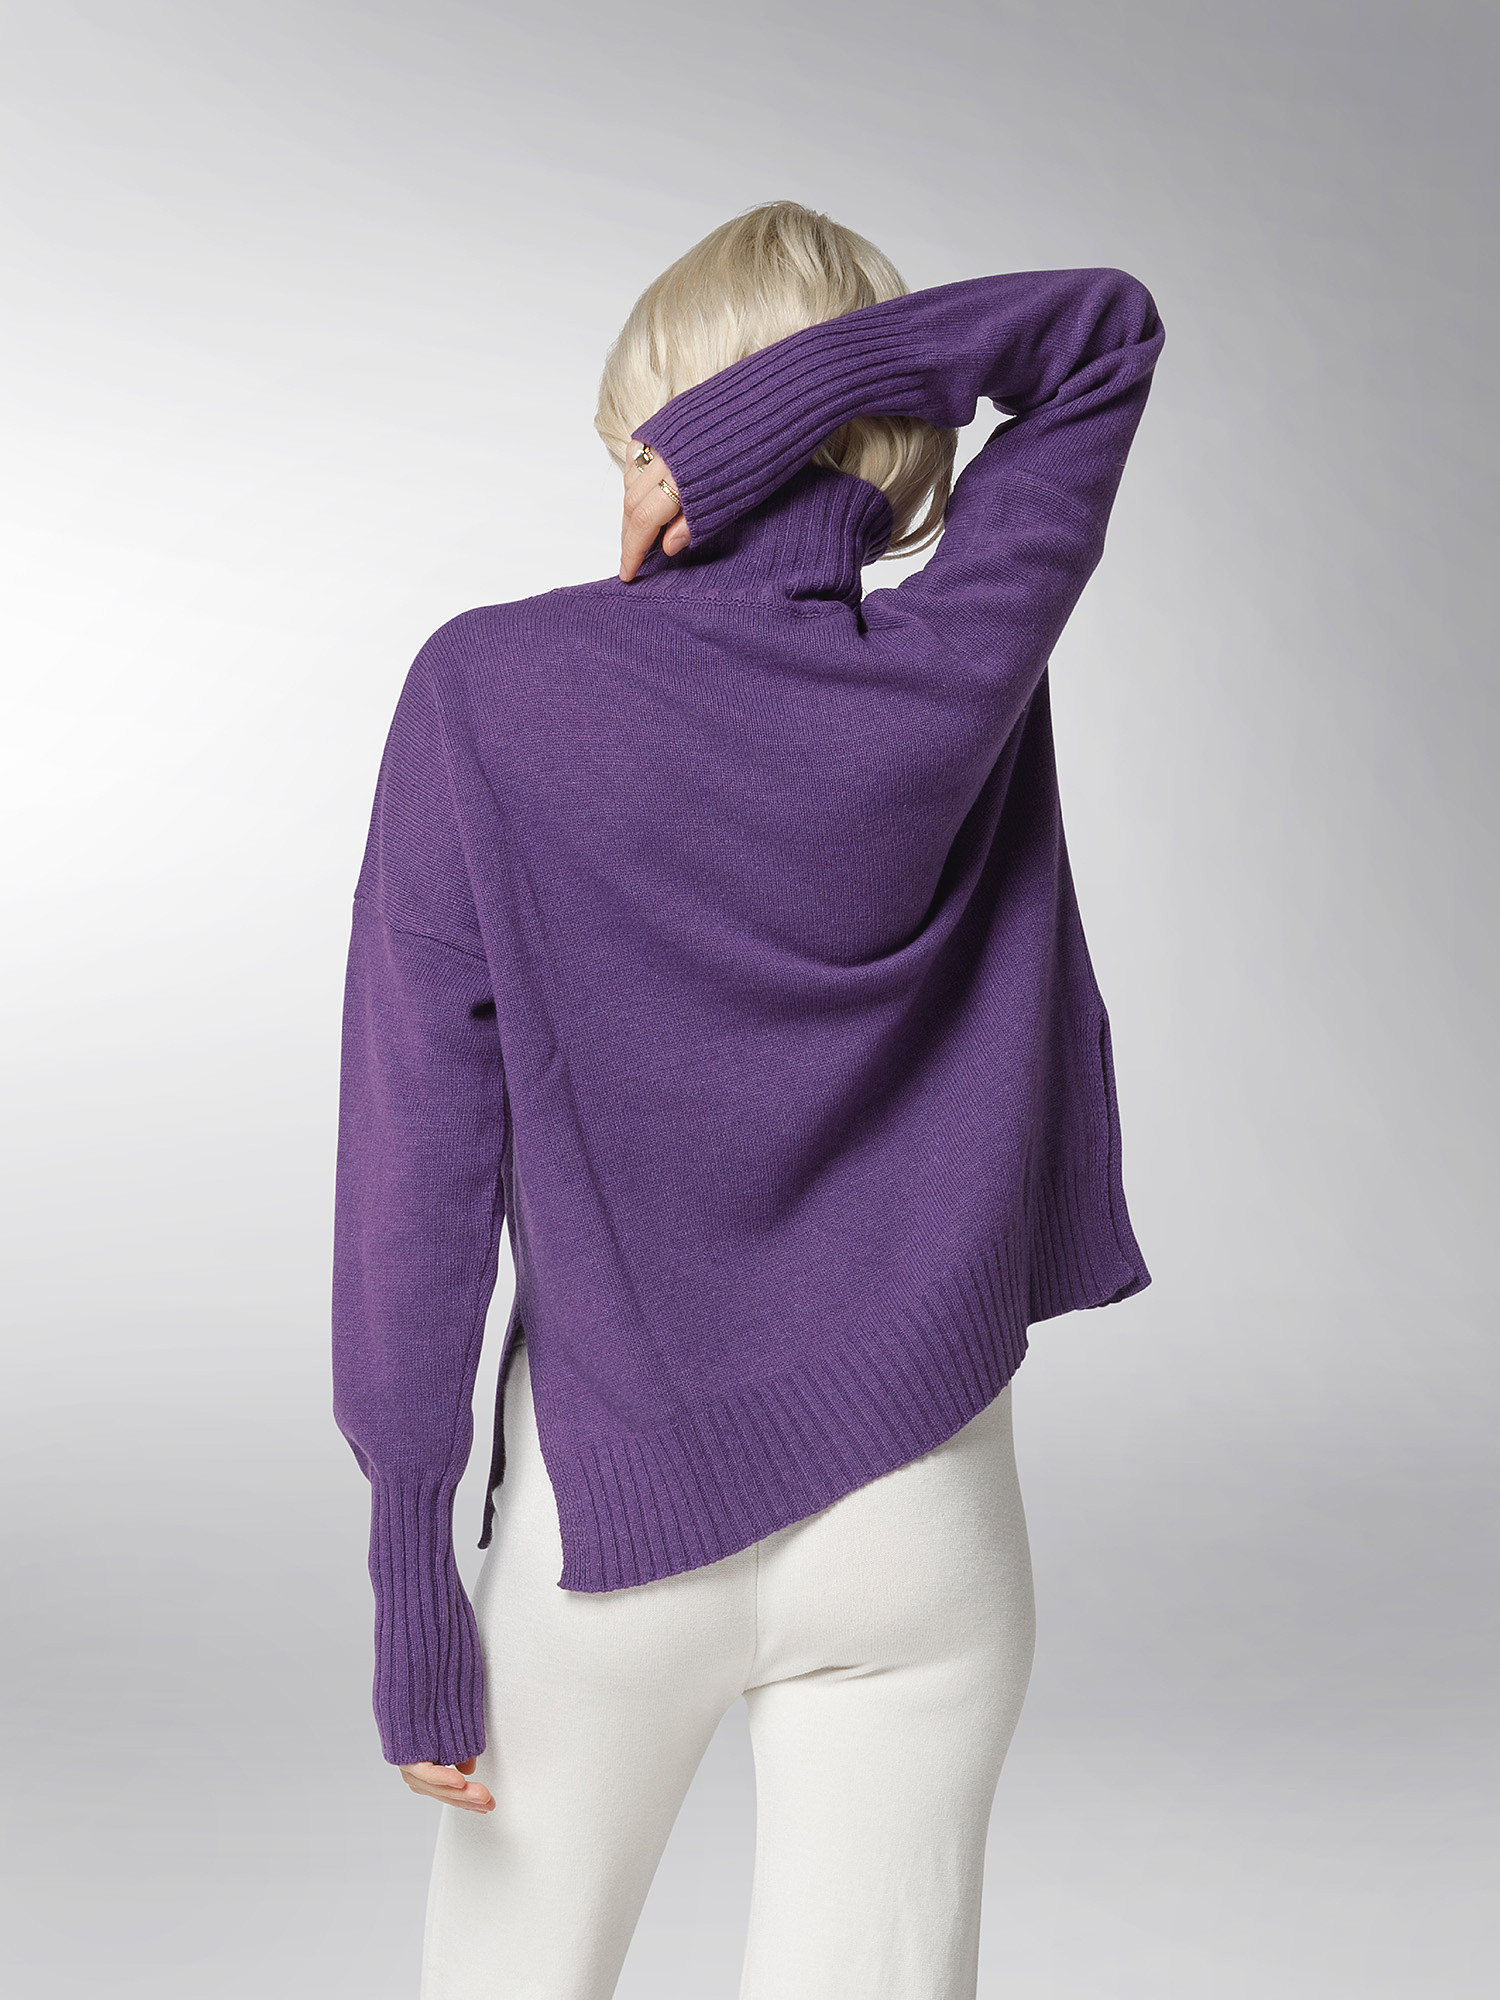 K Collection - Crater neck sweater, Purple, large image number 4